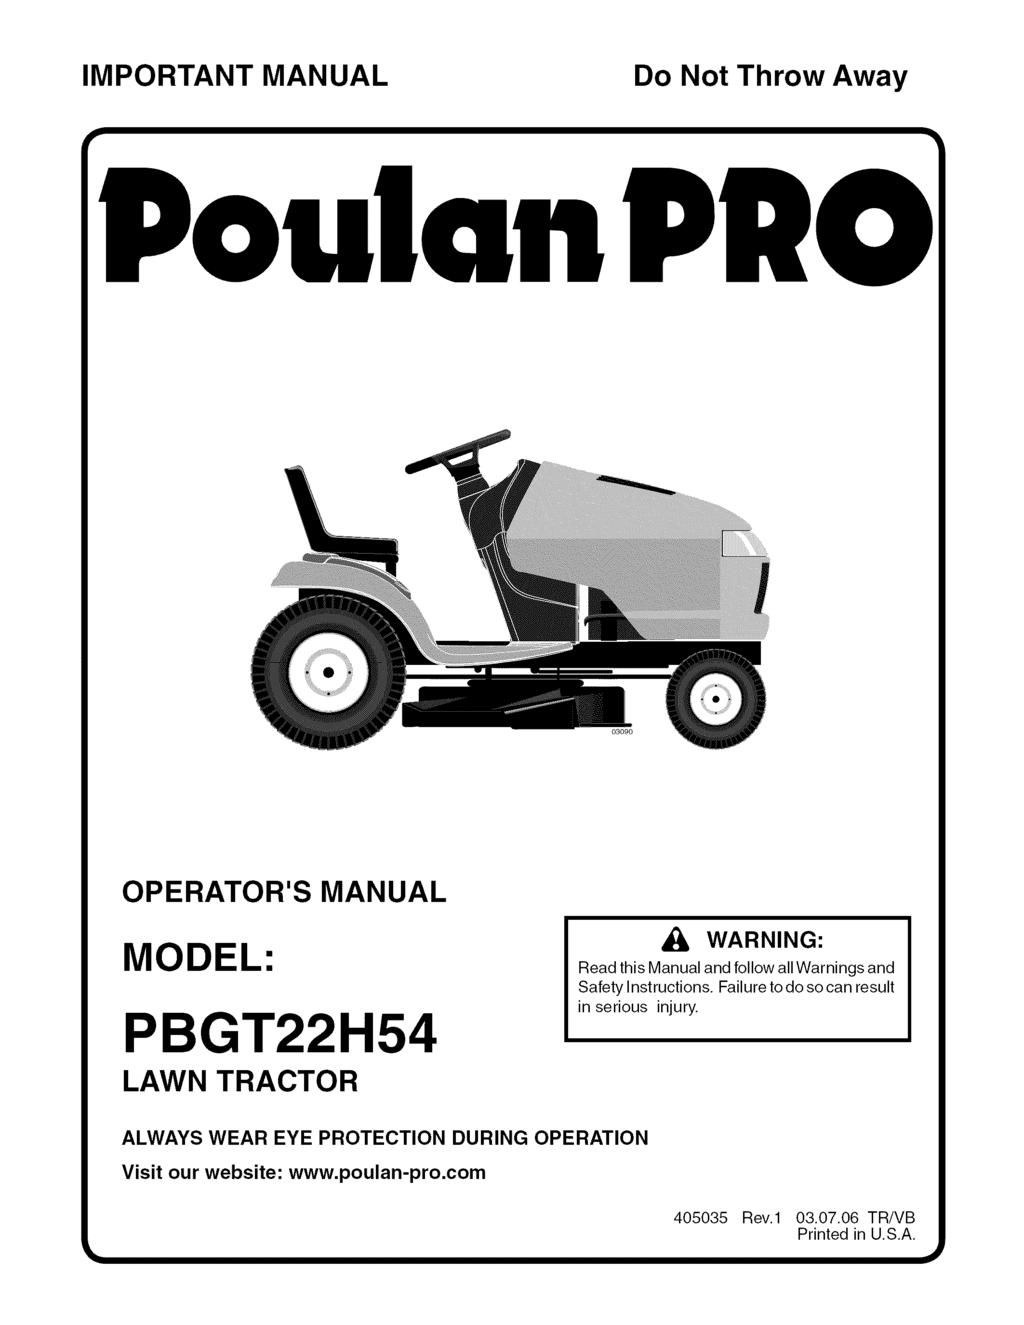 IMPORTANT MANUAL Do Not Throw Away OPERATOR'S MANUAL MODEL: PBGT22H54 LAWN TRACTOR _k, WARNING: Read this Manual and follow all Warnings and Safety Instructions.